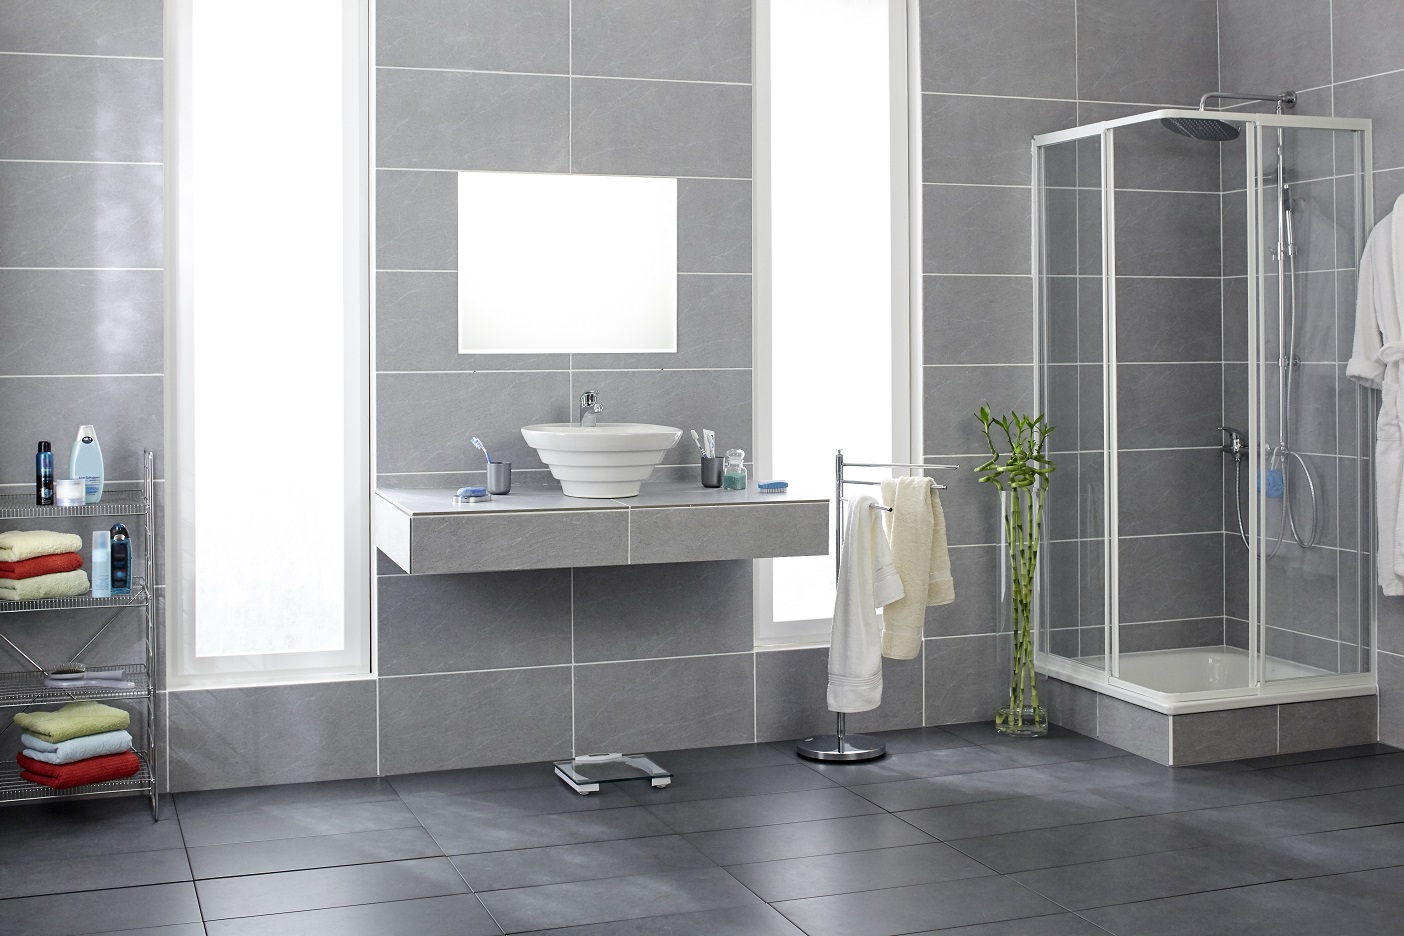 Upgrade Your Bathroom With Fresh Tile & Curtain-less Shower Space